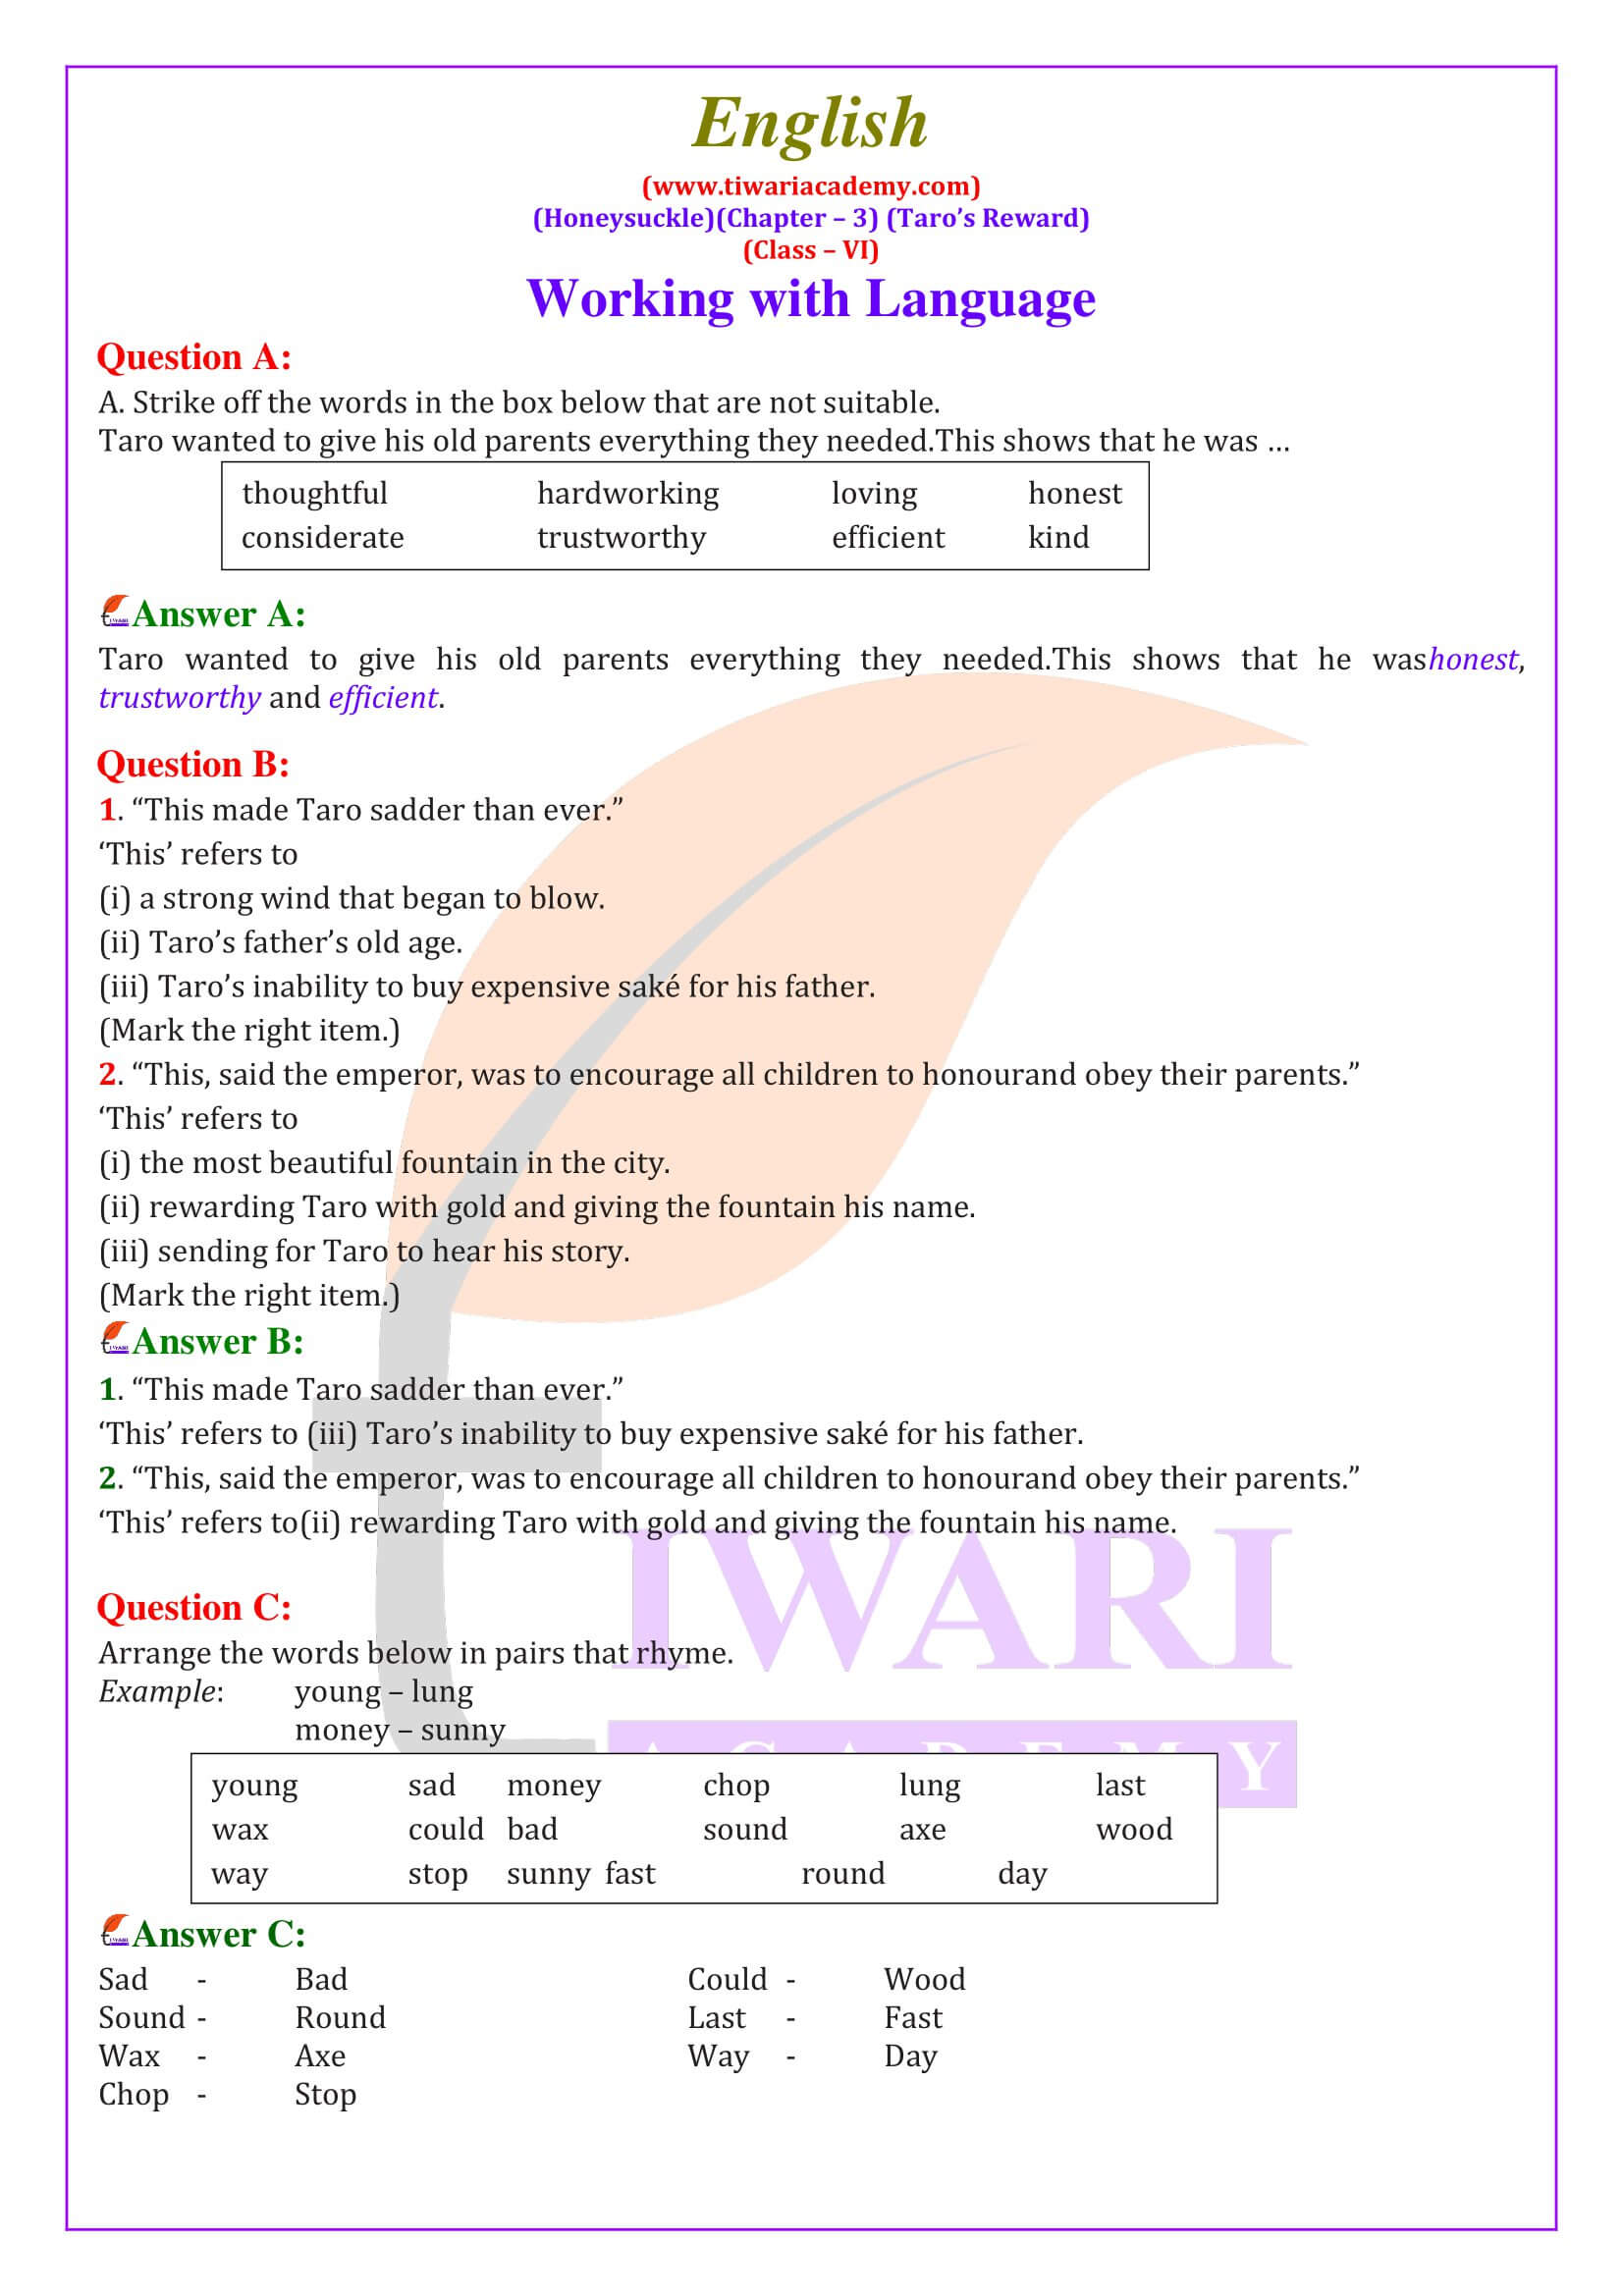 NCERT Solutions for Class 6 English Honeysuckle Chapter 3 Taro’s Reward Questions Answers